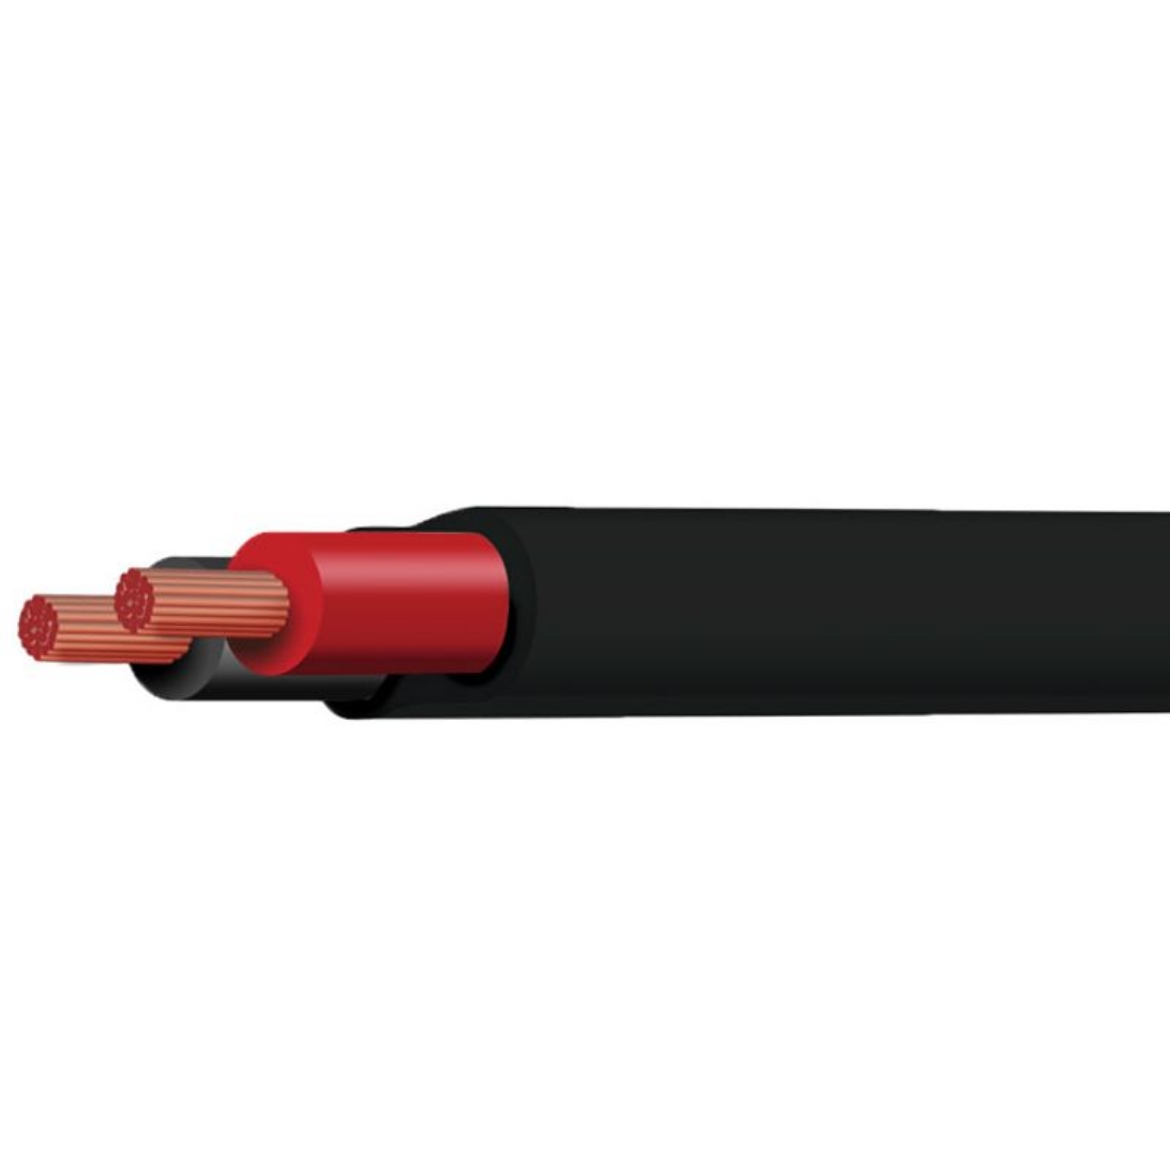 Picture of TYCAB TWIN CORE CABLE BATTERY 4  B&S CROSS SECT 20MM SQ RATING 135A BLACK/RED - 30M ROLL